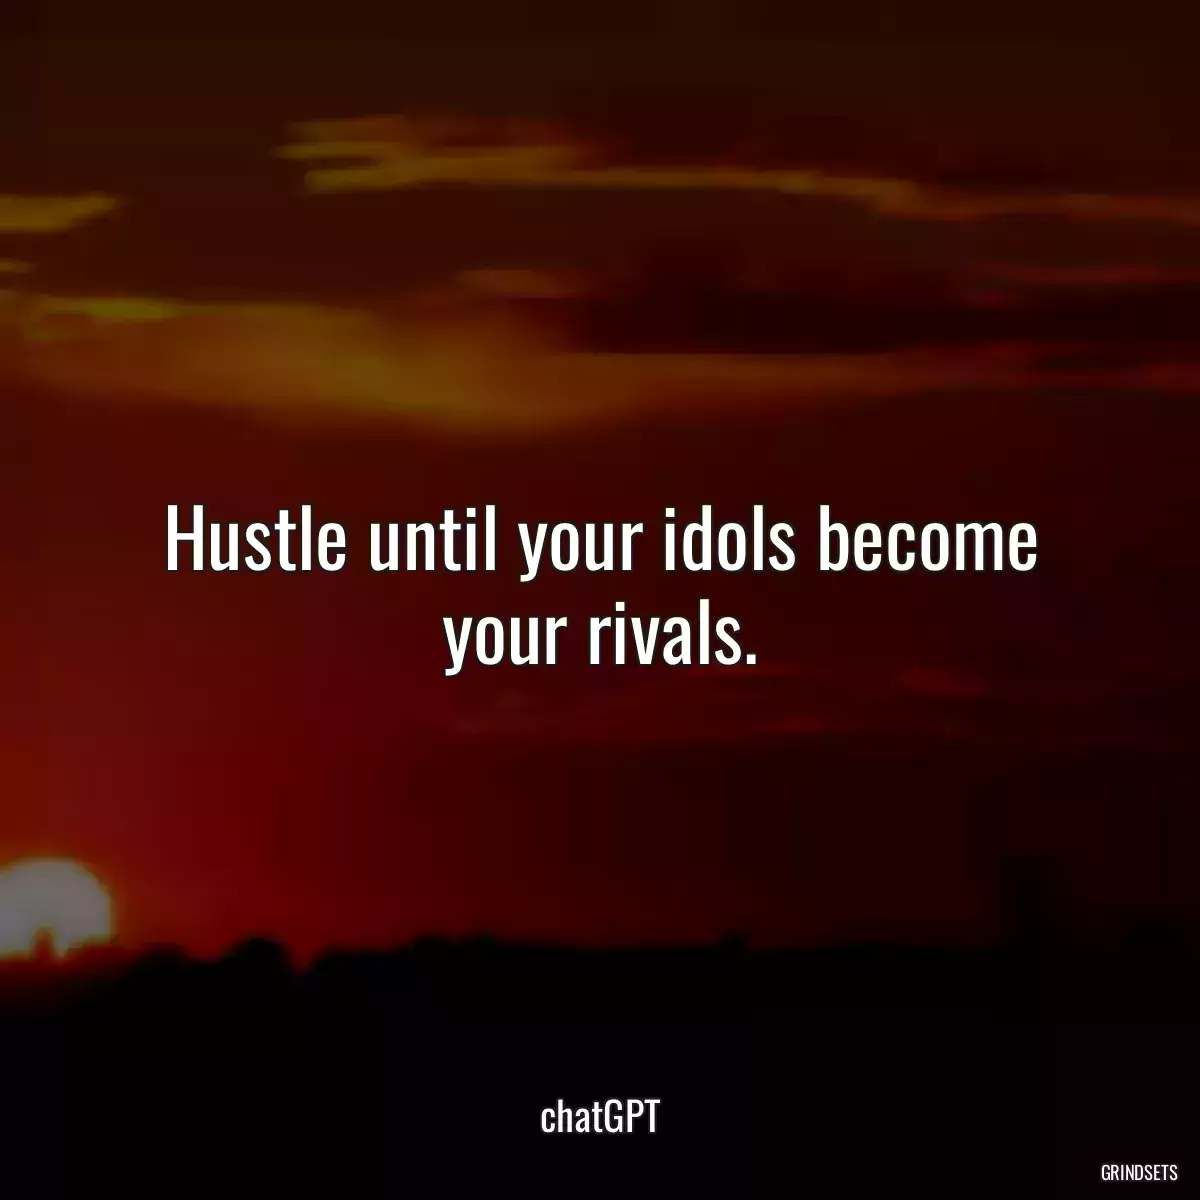 Hustle until your idols become your rivals.